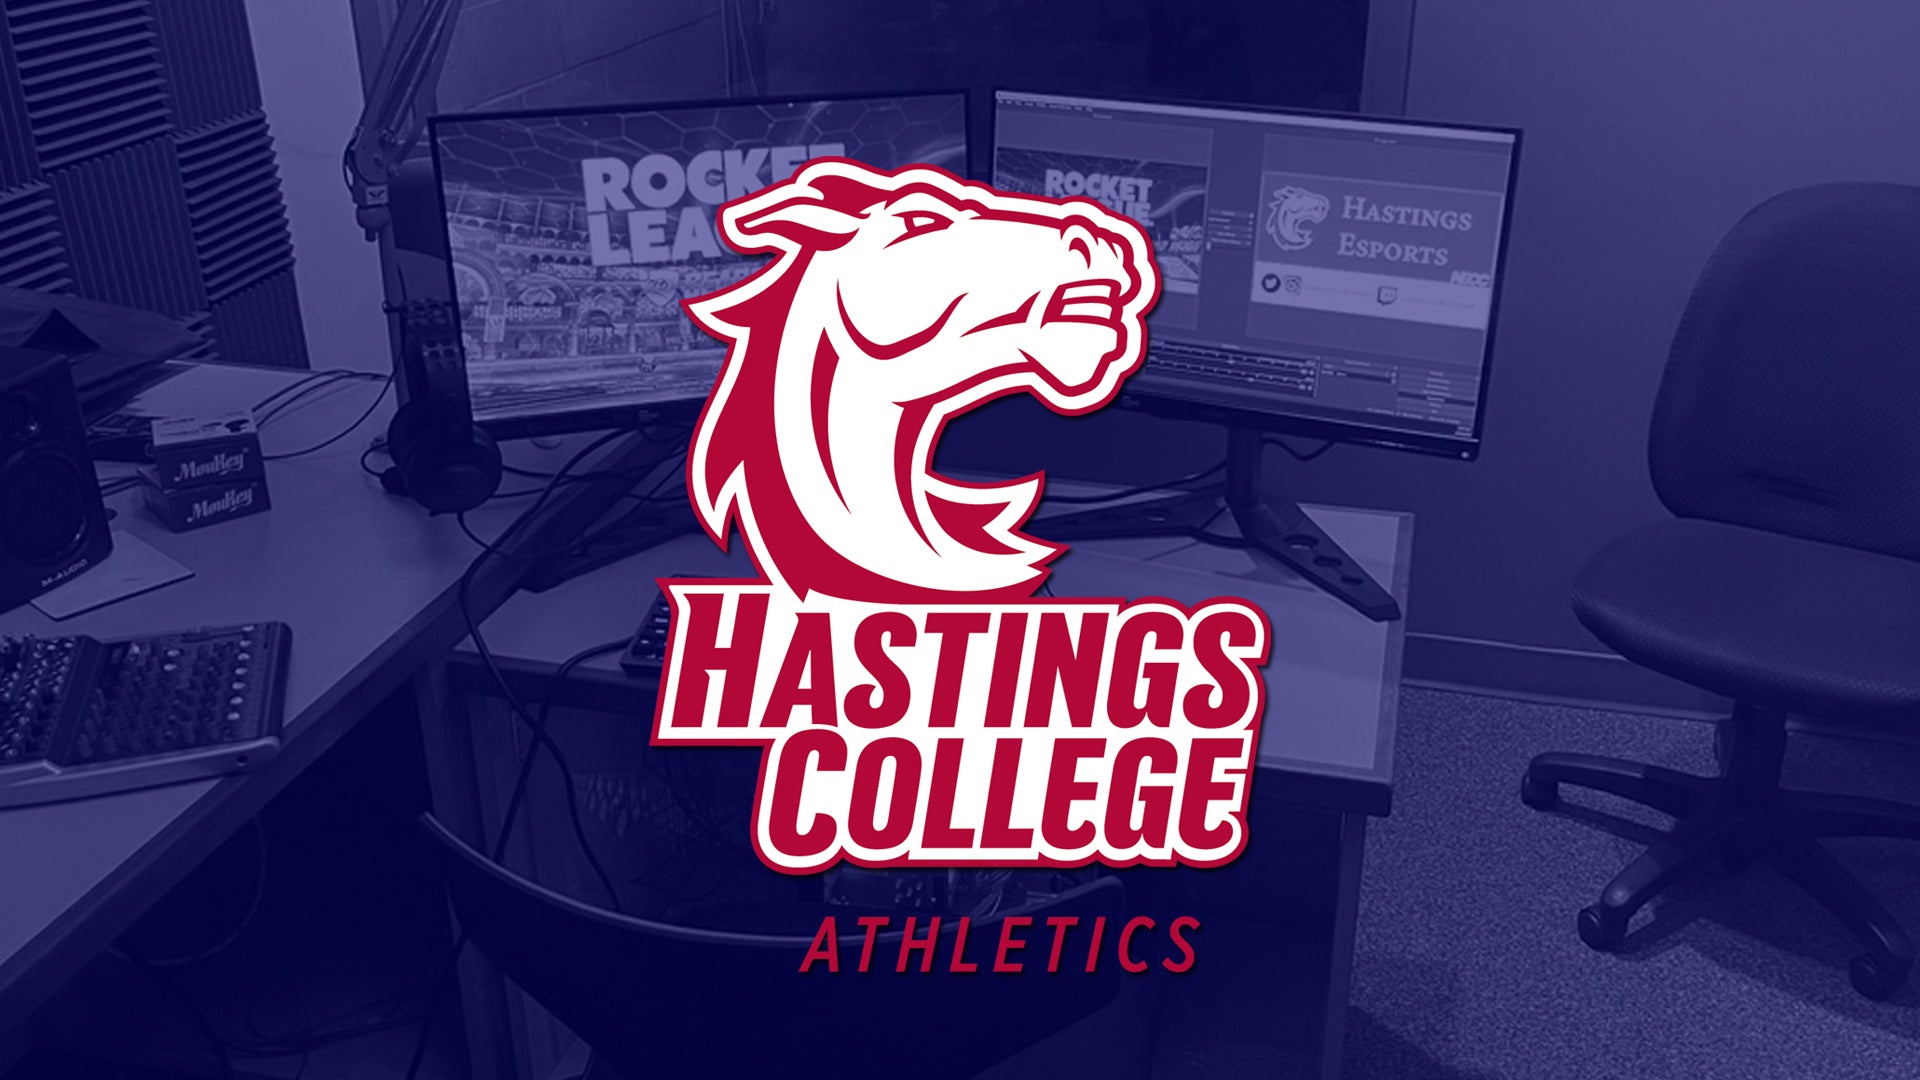 Esports Becomes 24th Varsity Sport at Hastings College